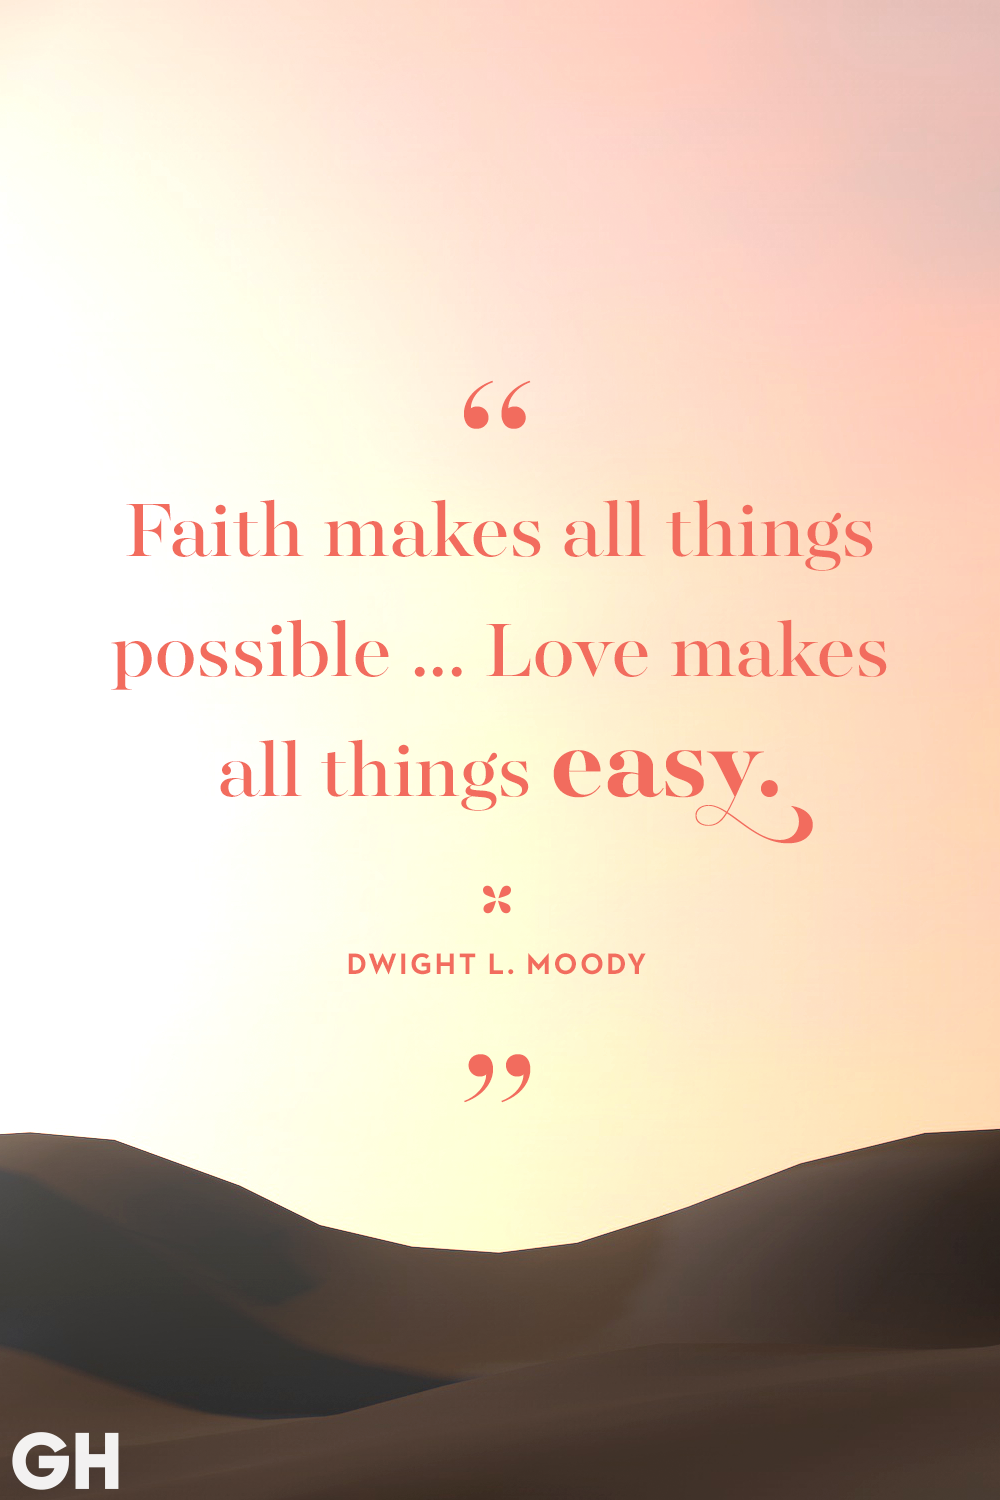 faith makes all things possible… love makes all things easy. dwight l. moody